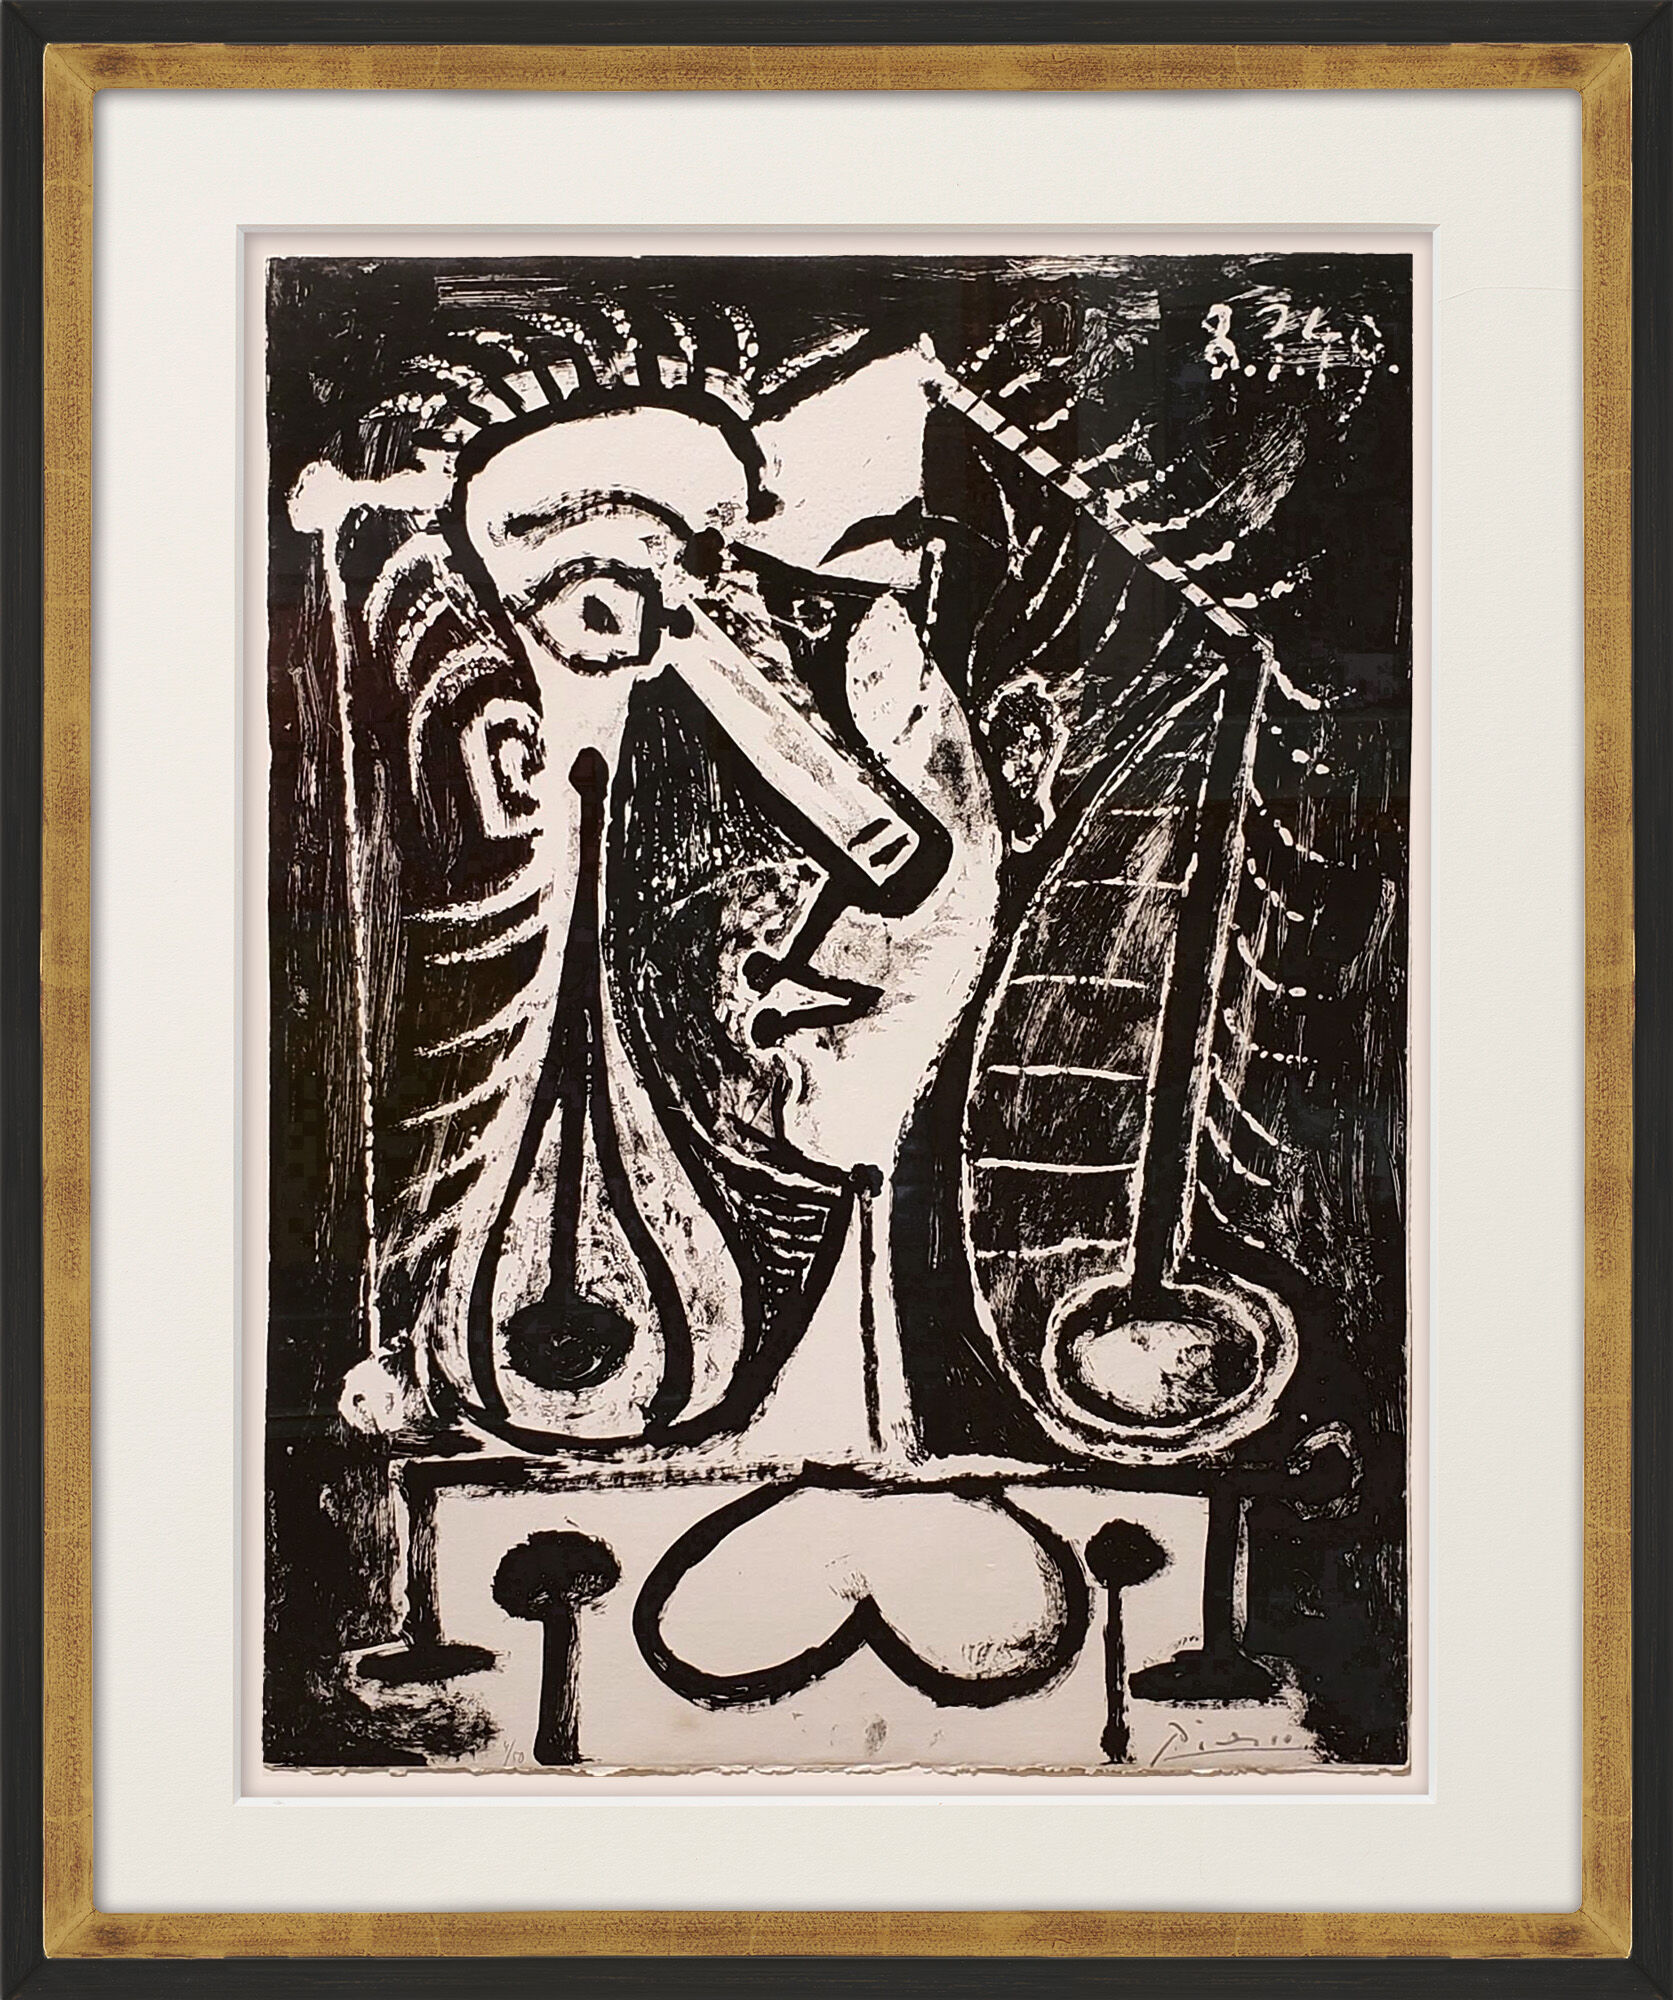 Picture "Figure Composee I" (1949) by Pablo Picasso